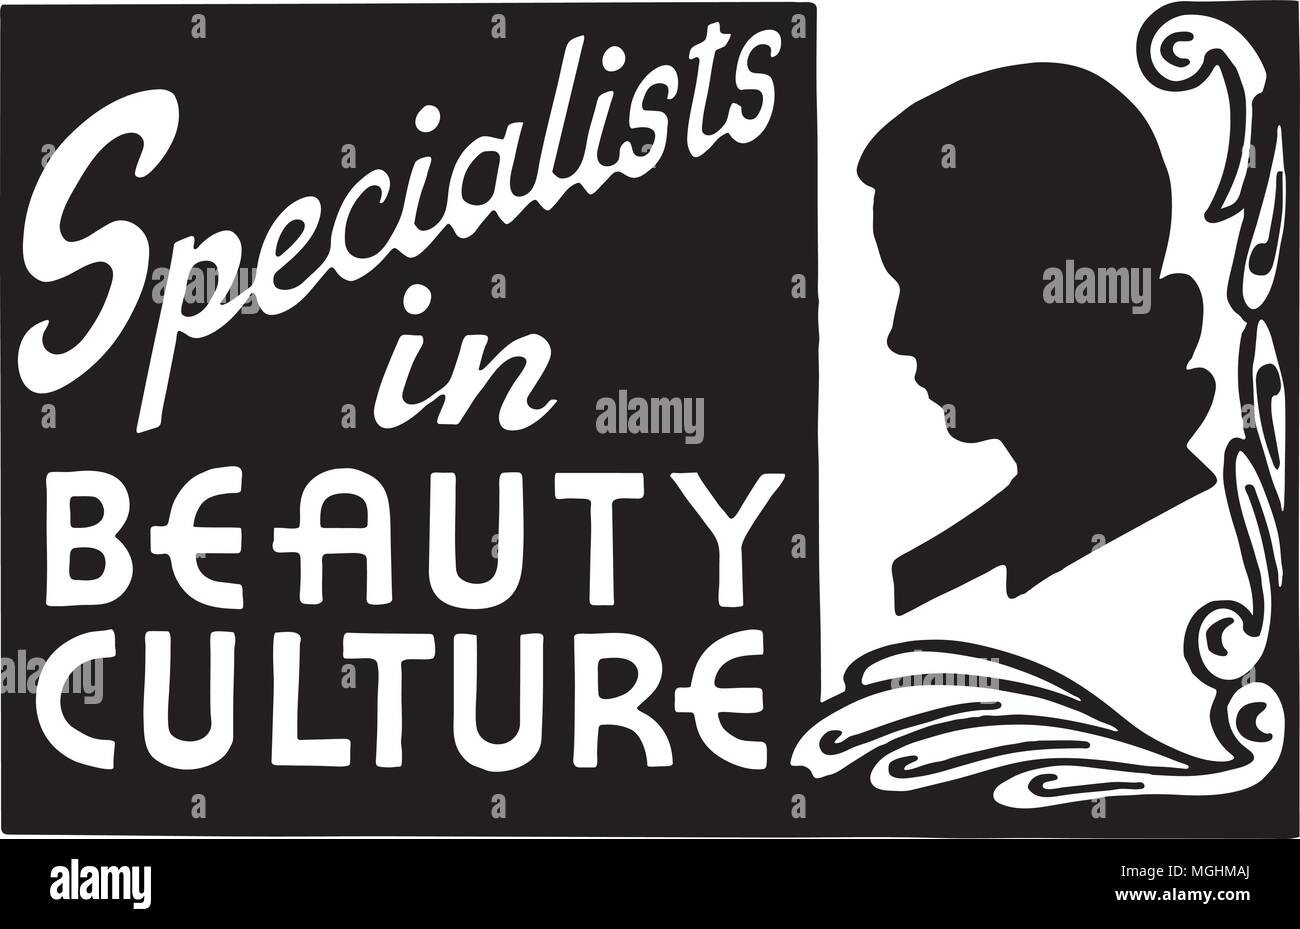 Specialists In Beauty Culture 2 - Retro Ad Art Banner Stock Vector